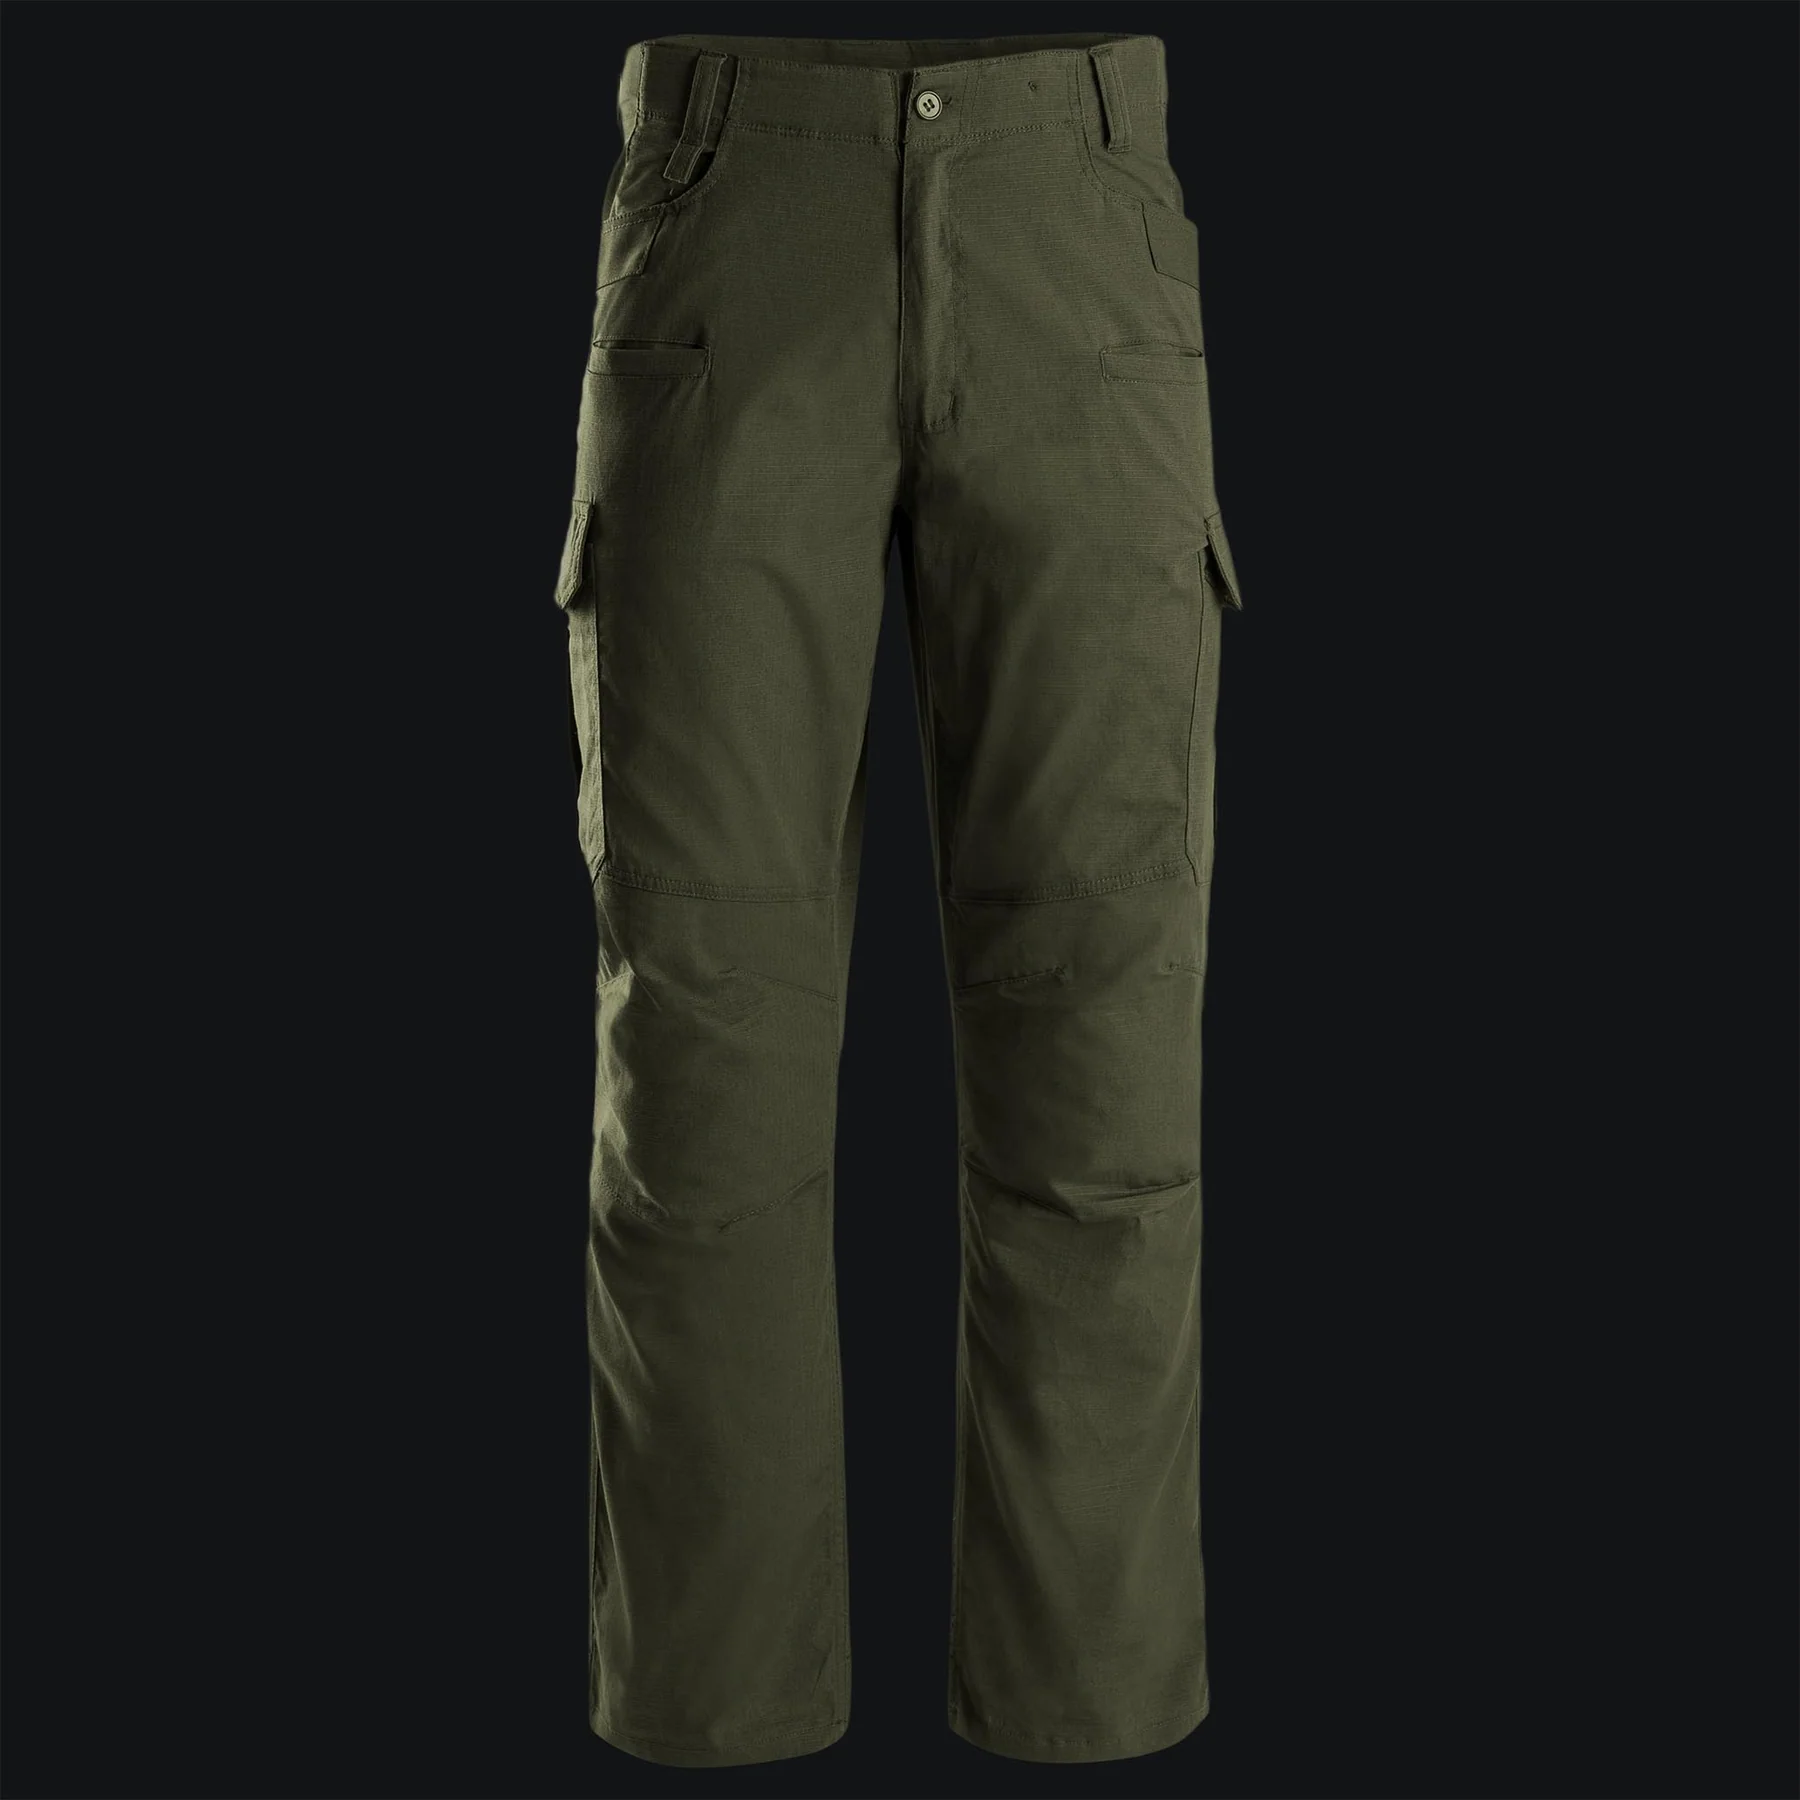 STOIRM TACTICAL Ripstop Combat Trousers- Olive